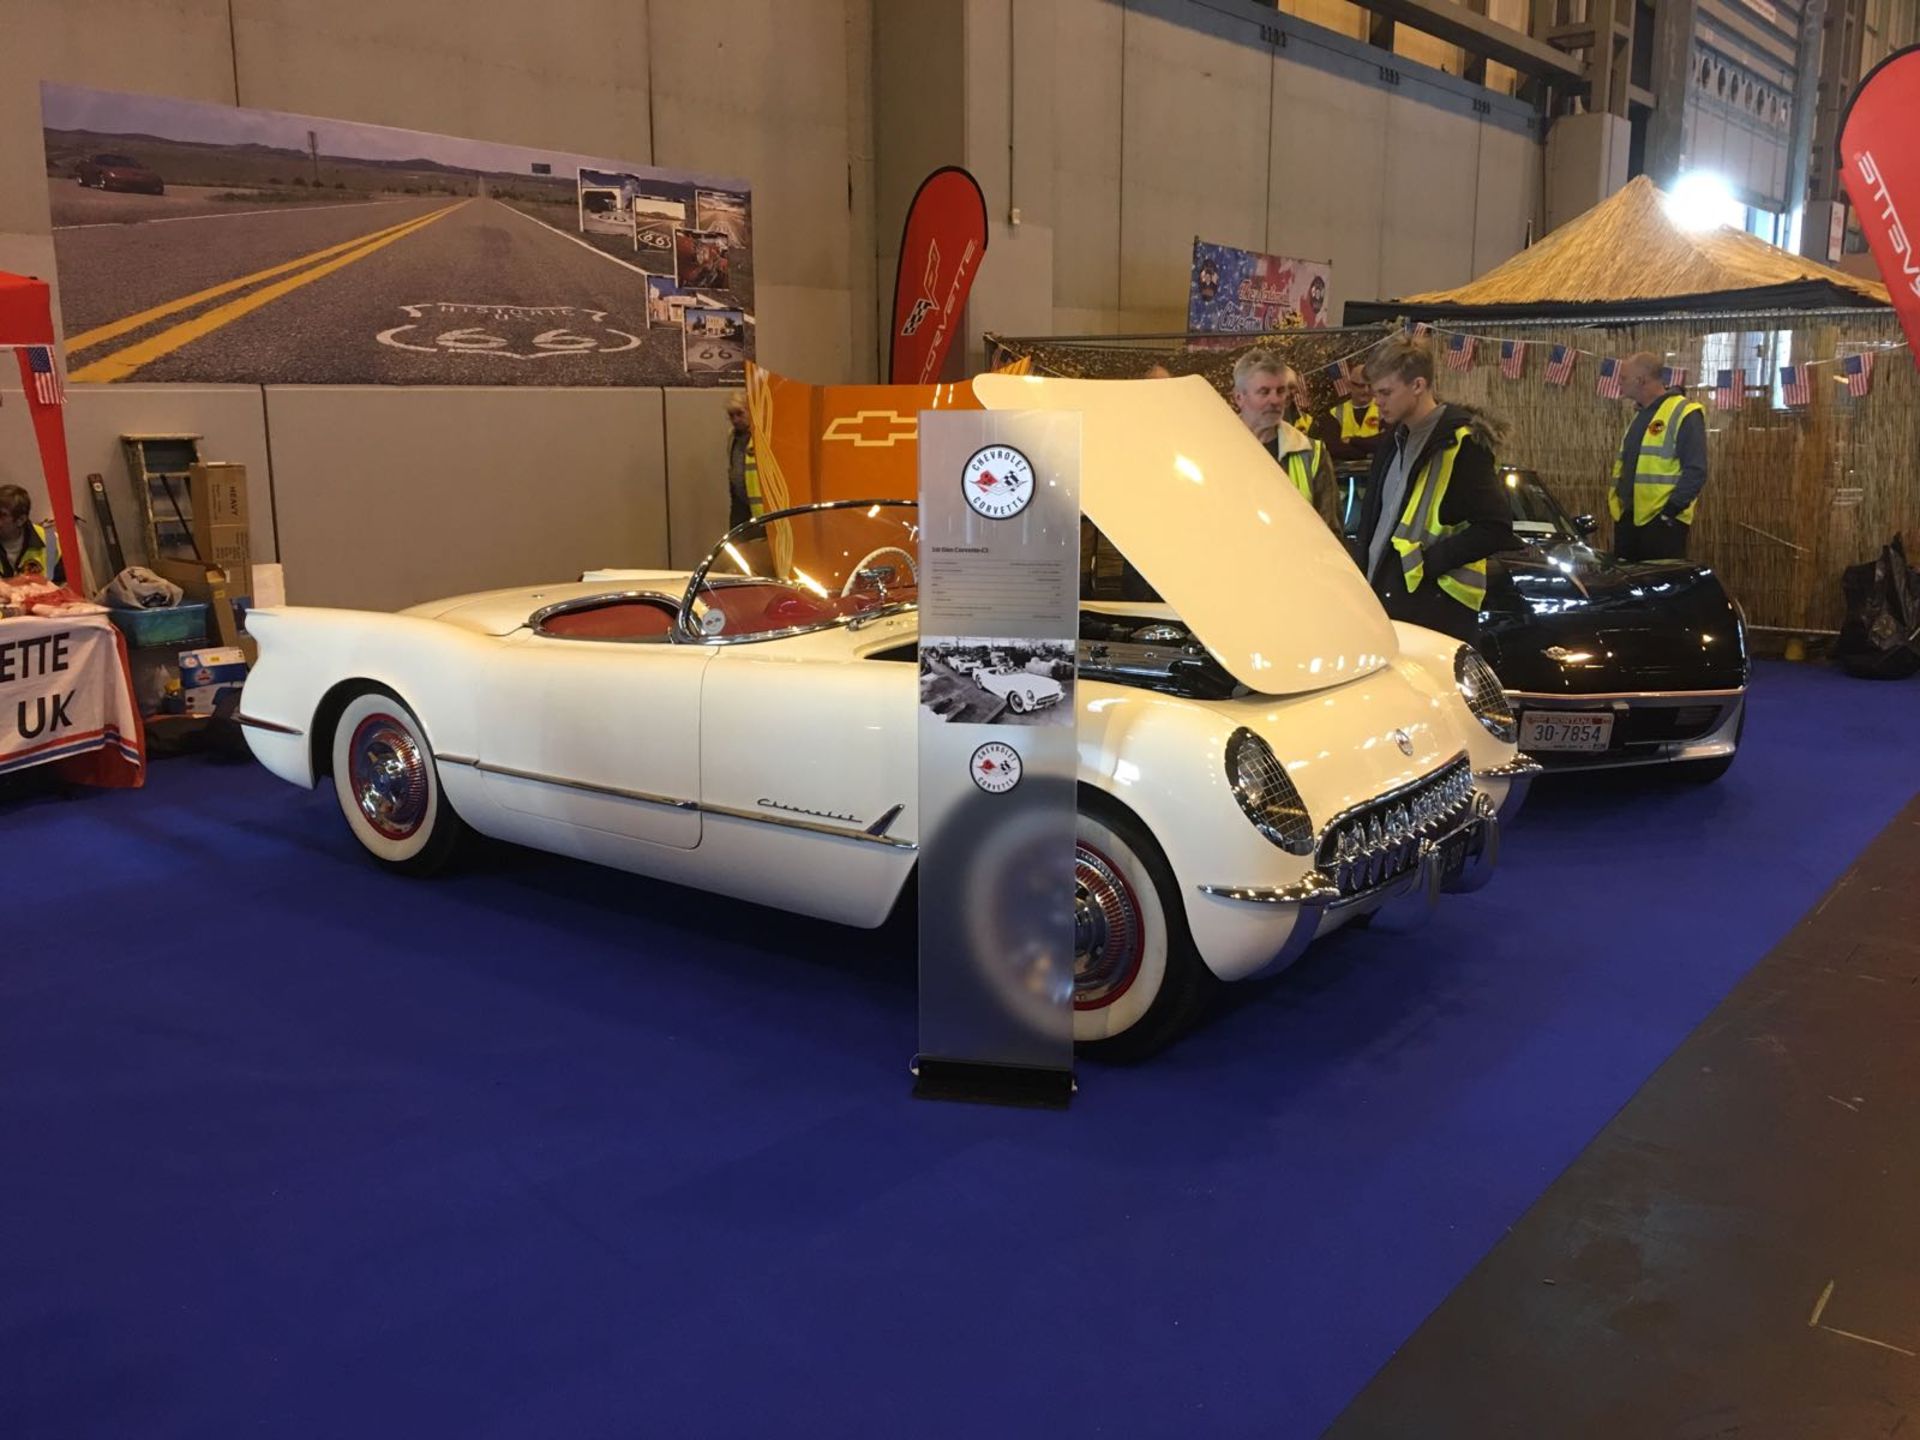 1954 Corvette In The UK ***NO RESERVE*** - Featured at the LCCS - Image 14 of 22